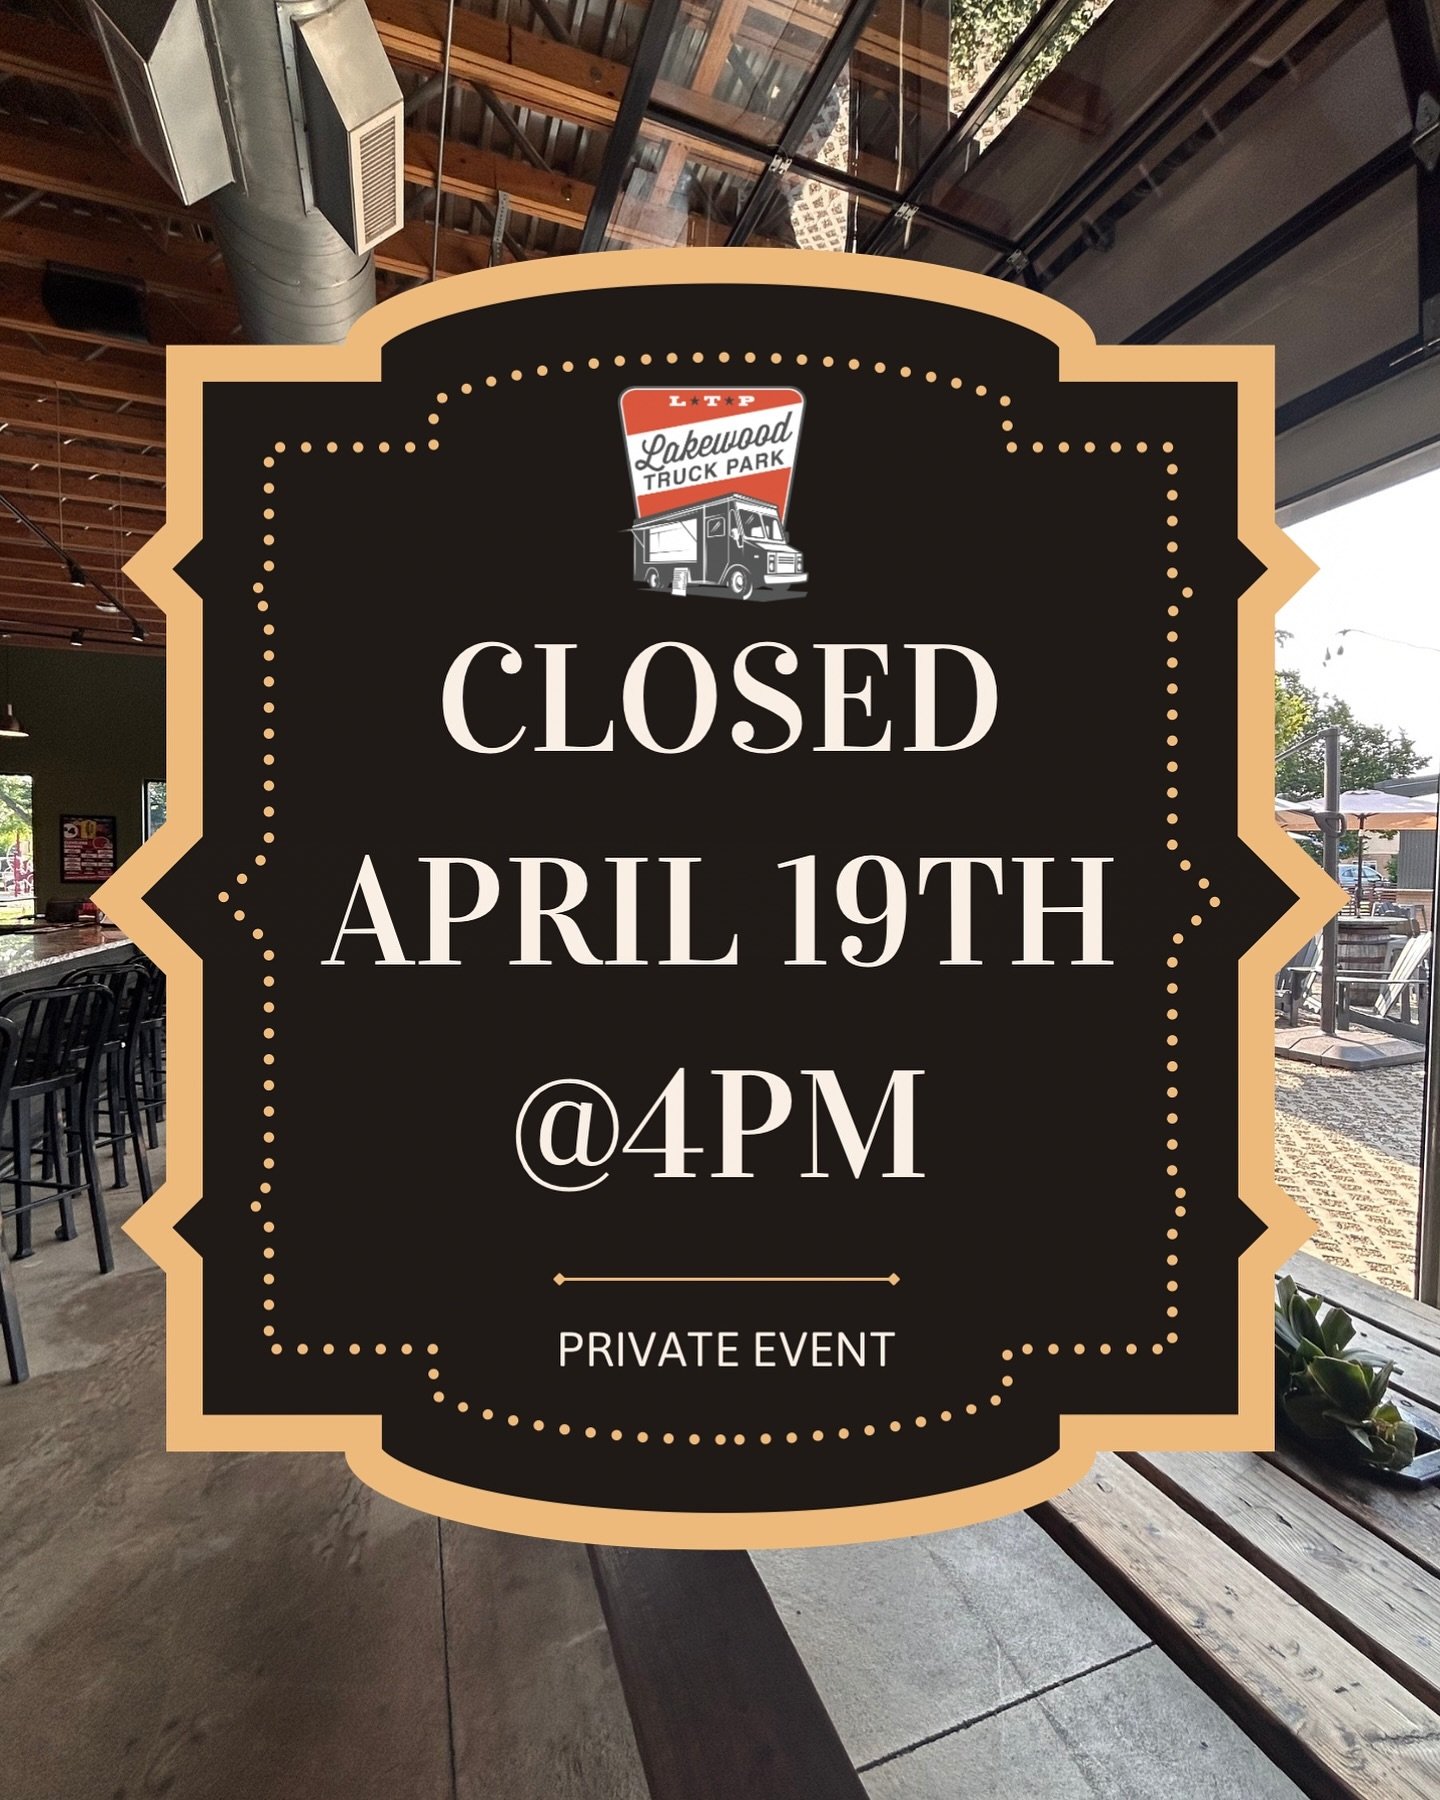 We will be CLOSED AT 4pm! Due to a private event. Join us for happy hour 11am-4pm and @dawgbowlfoodtruck 11am-4pm